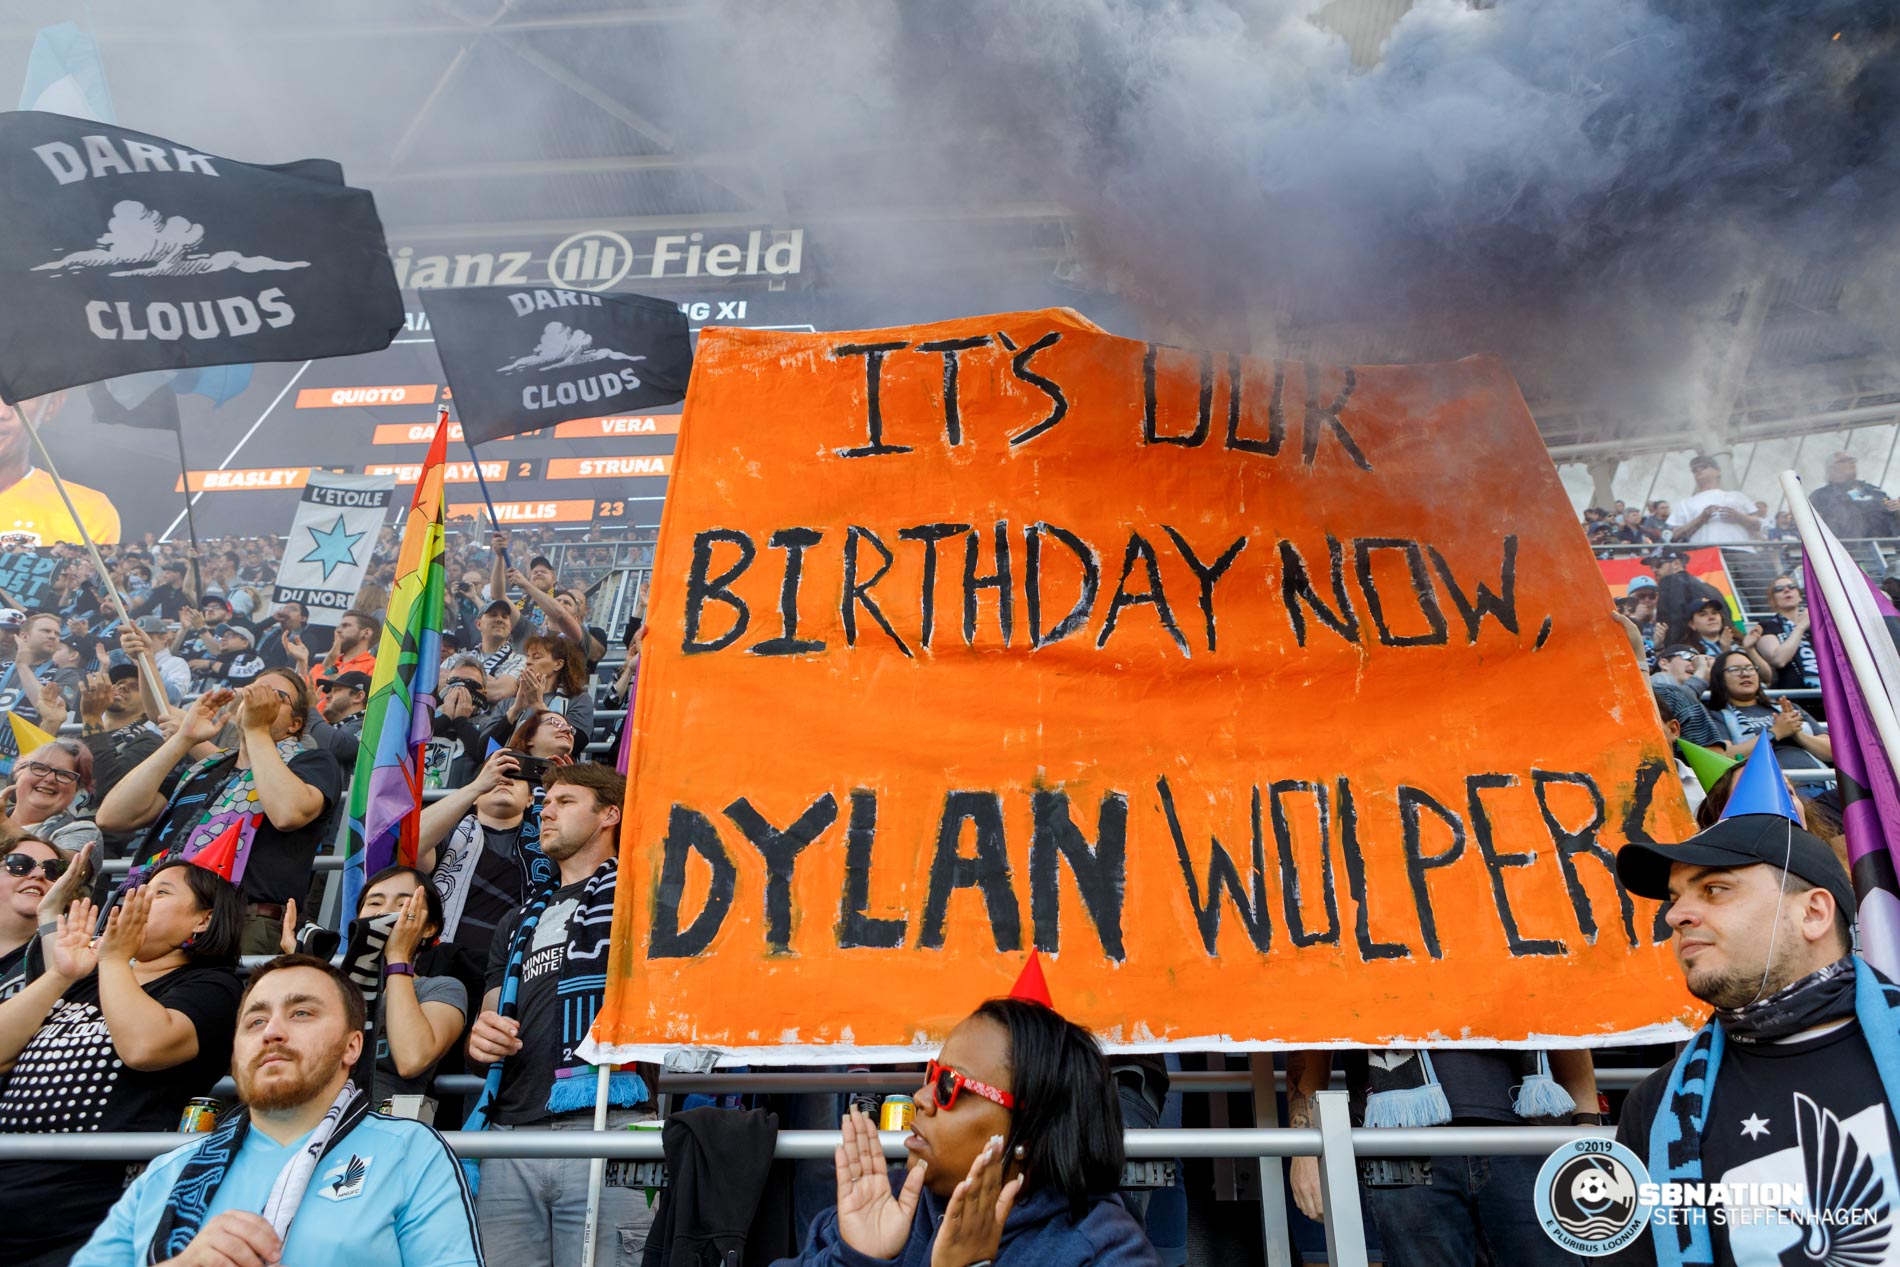 May 25, 2019 - Saint Paul, Minnesota, United States - Supporters display a small tifo in honor of the Dylan Wolpers Derby as Minnesota United host Houston Dynamo at Allianz Field. 

(Photo by Seth Steffenhagen/Steffenhagen Photography)